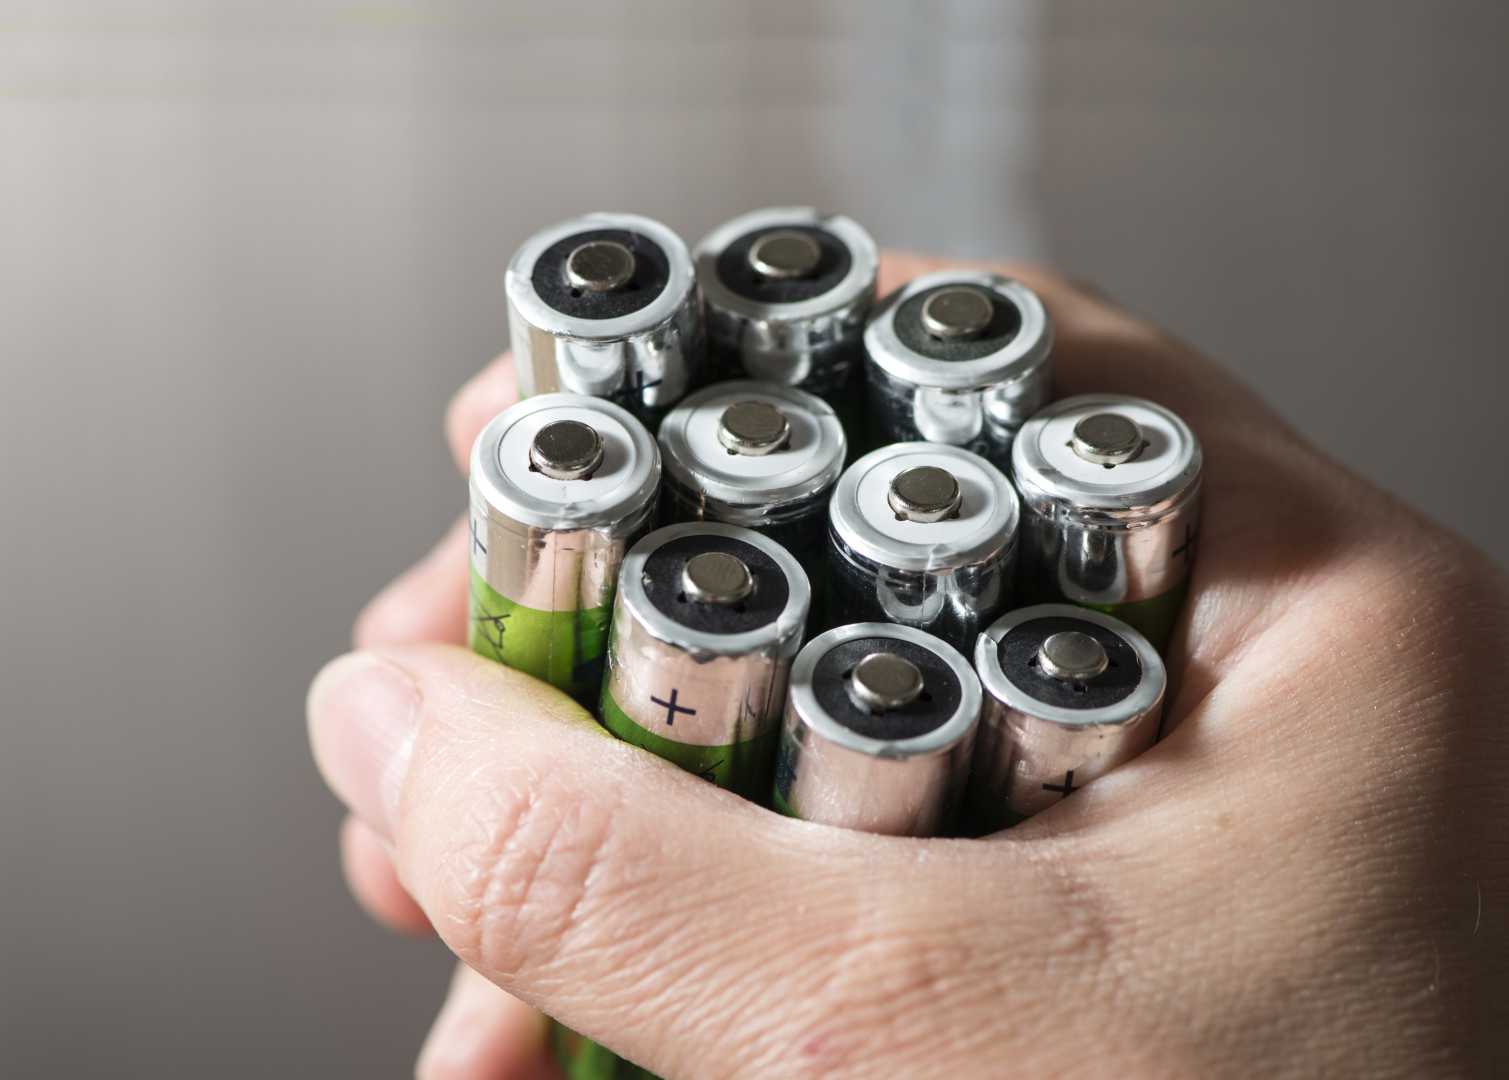 Why Should You Choose Rechargeable Over Disposable Batteries?